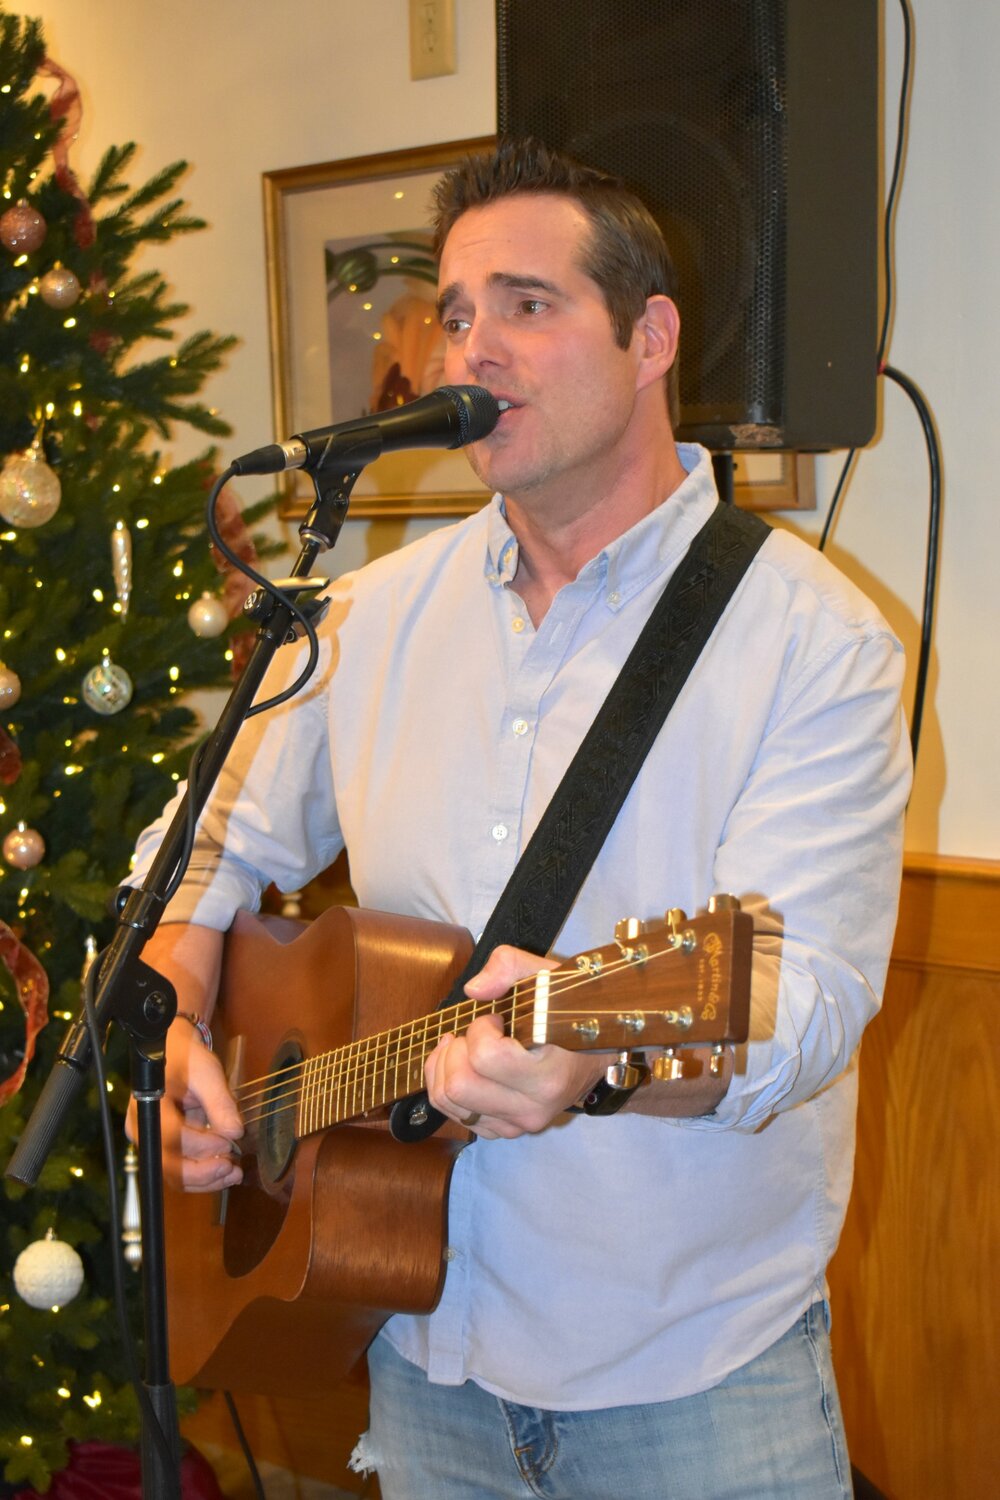 Bristol's own Jon Tyler was in his element during Saturday's Kickoff to Christmas Community Aid Drive event.